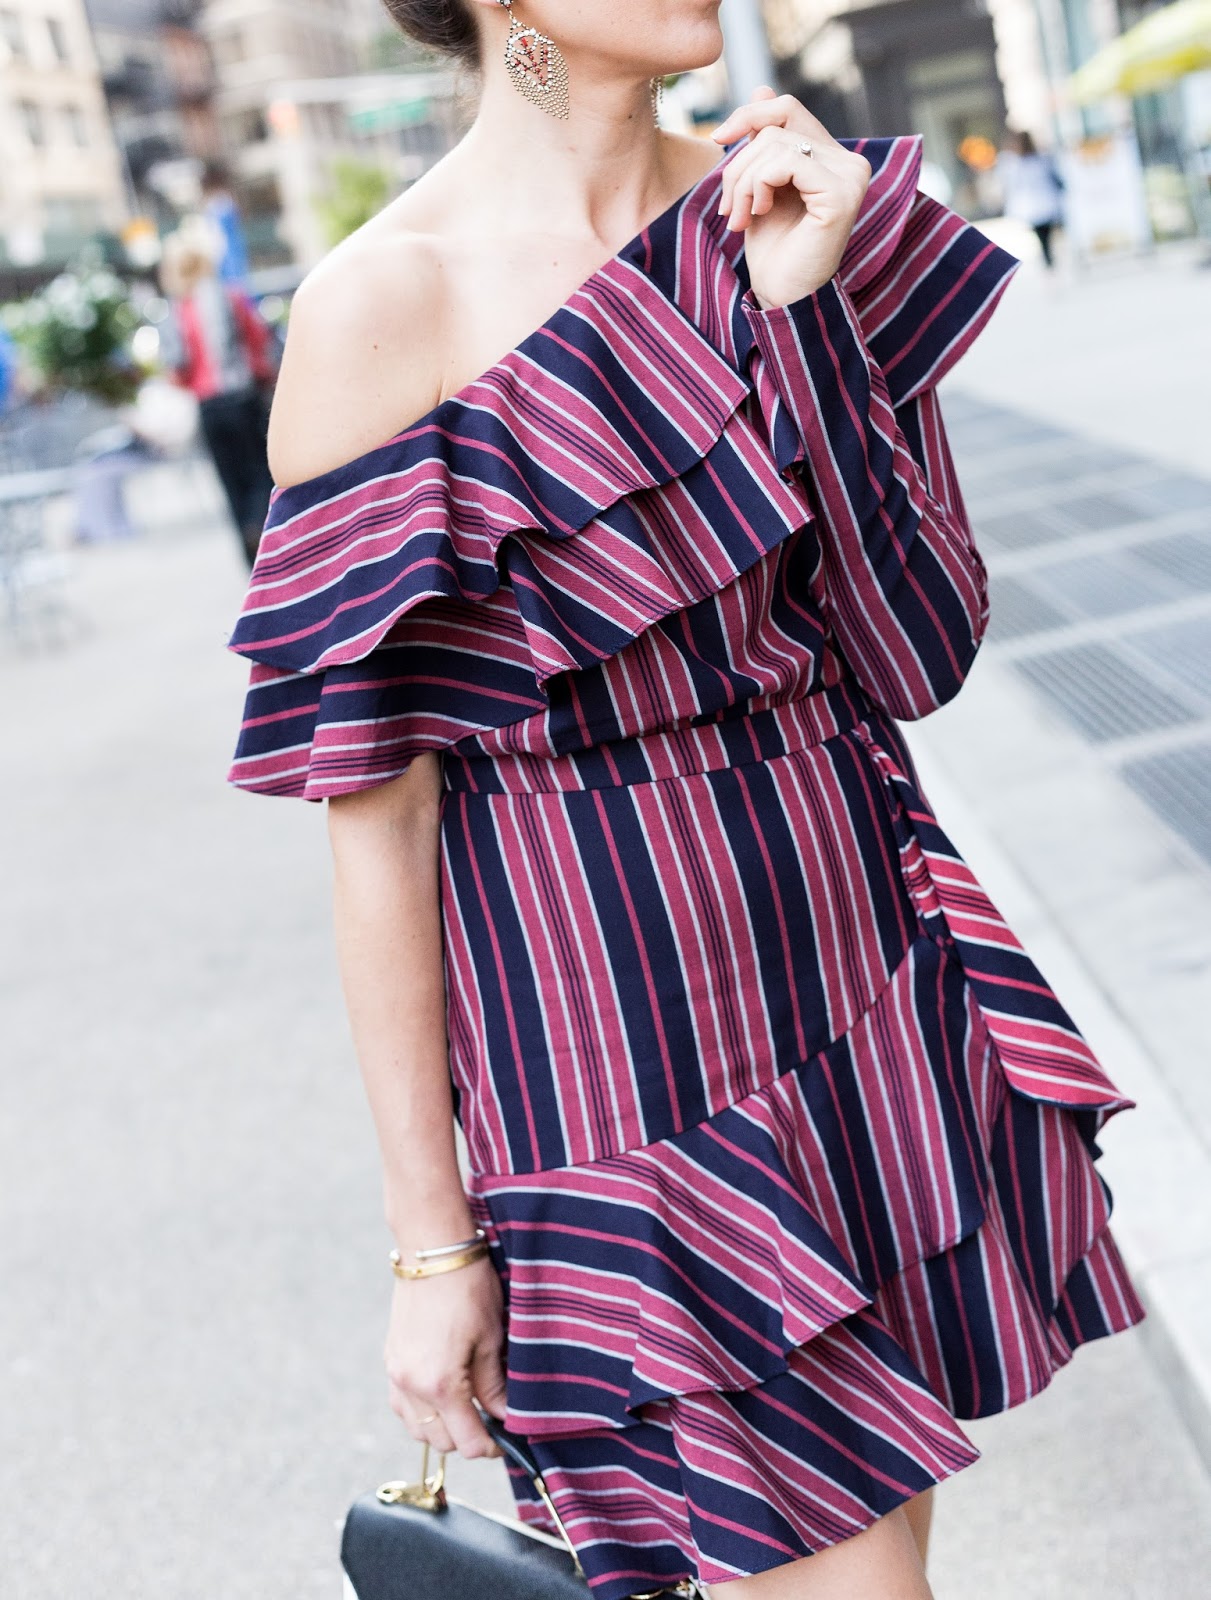 7 Tips to Take The Perfect Picture by Colorado fashion blogger Eat Pray Wear Love